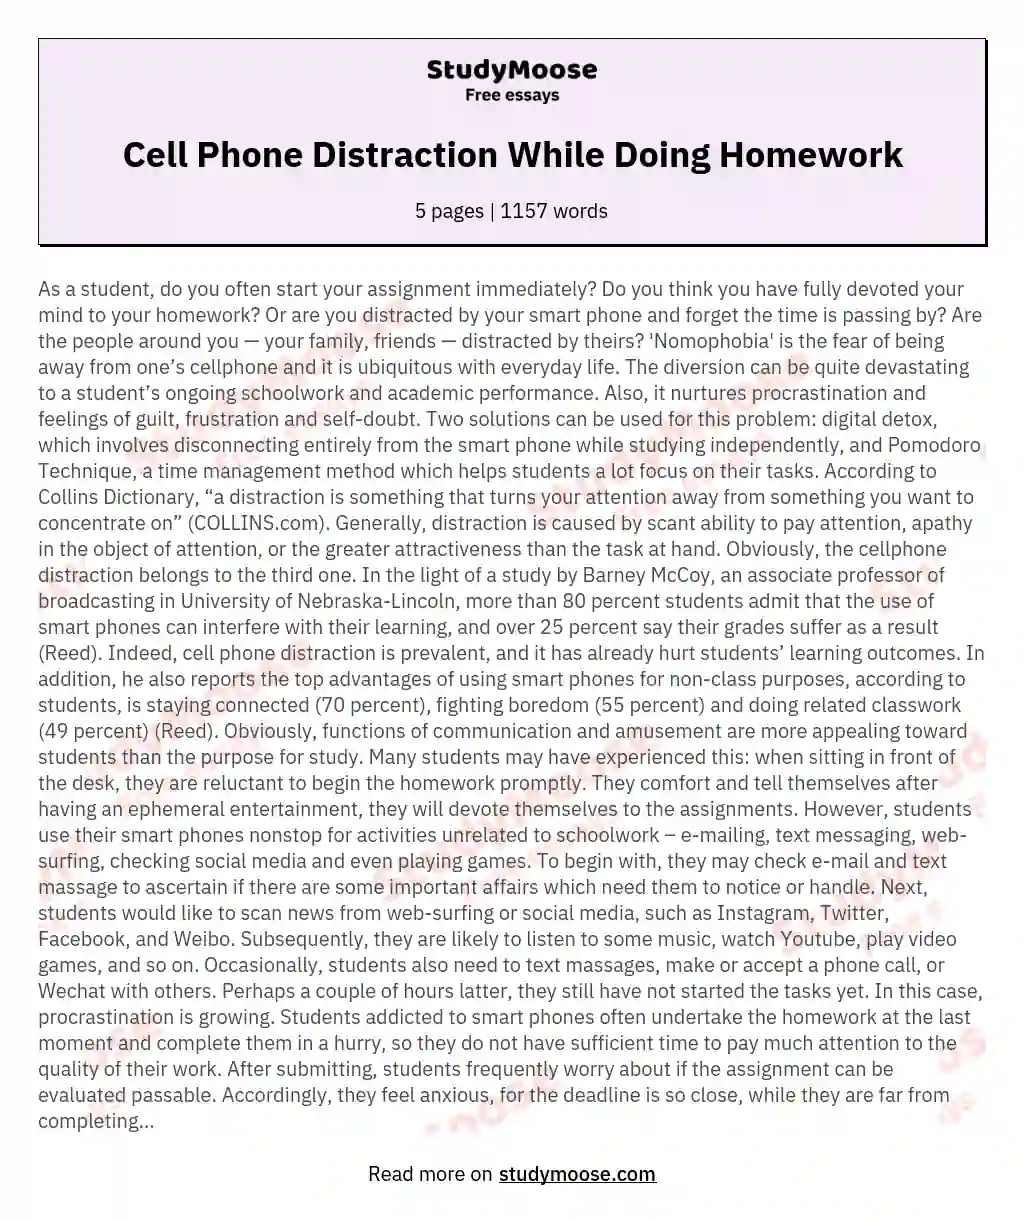 Cell Phone Distraction While Doing Homework essay